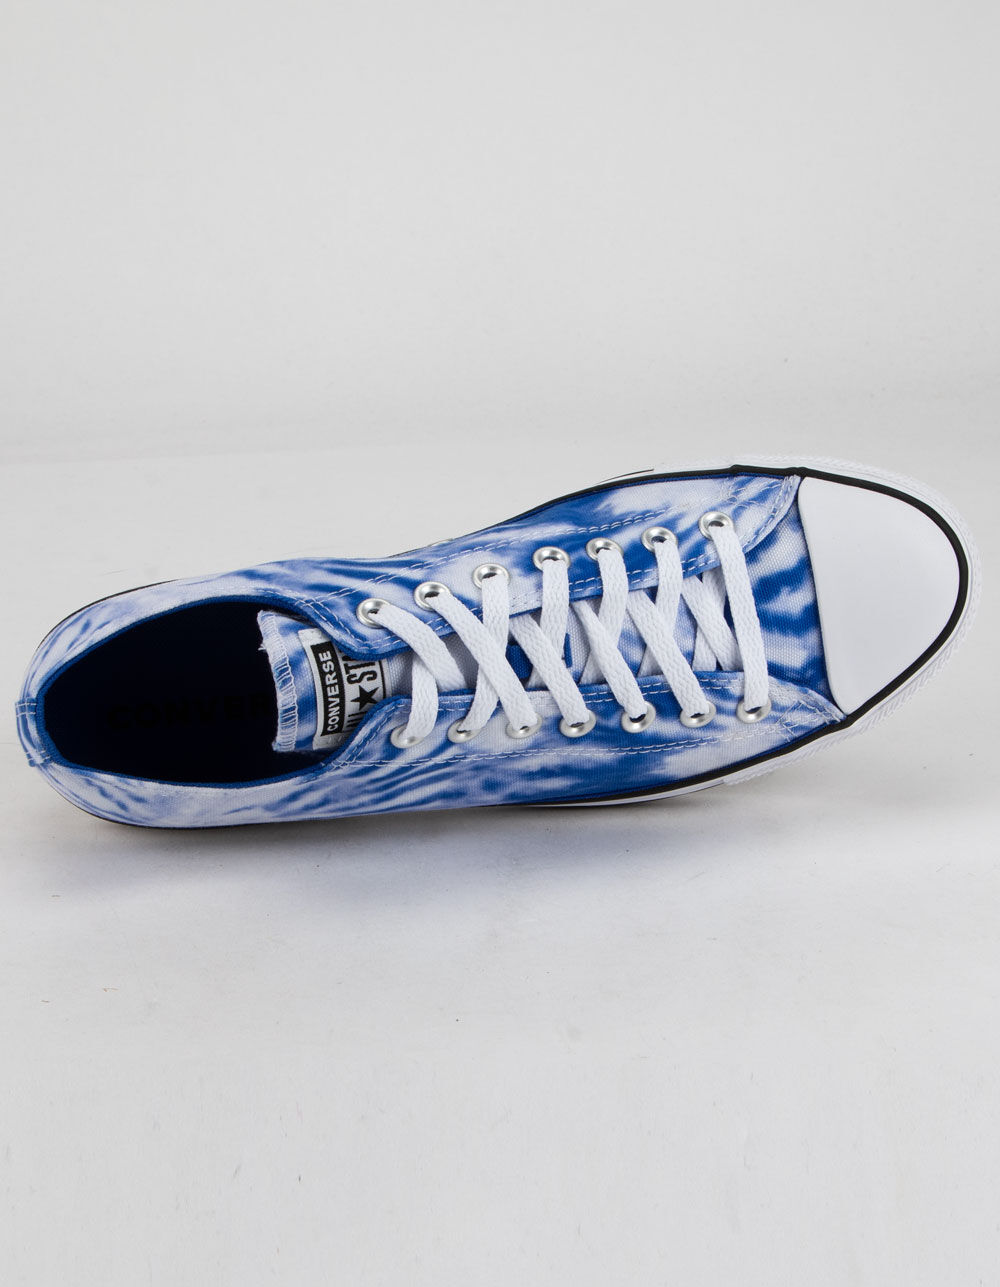 CONVERSE Twisted Vacation Chuck Taylor All Star Low Top Shoes image number 2